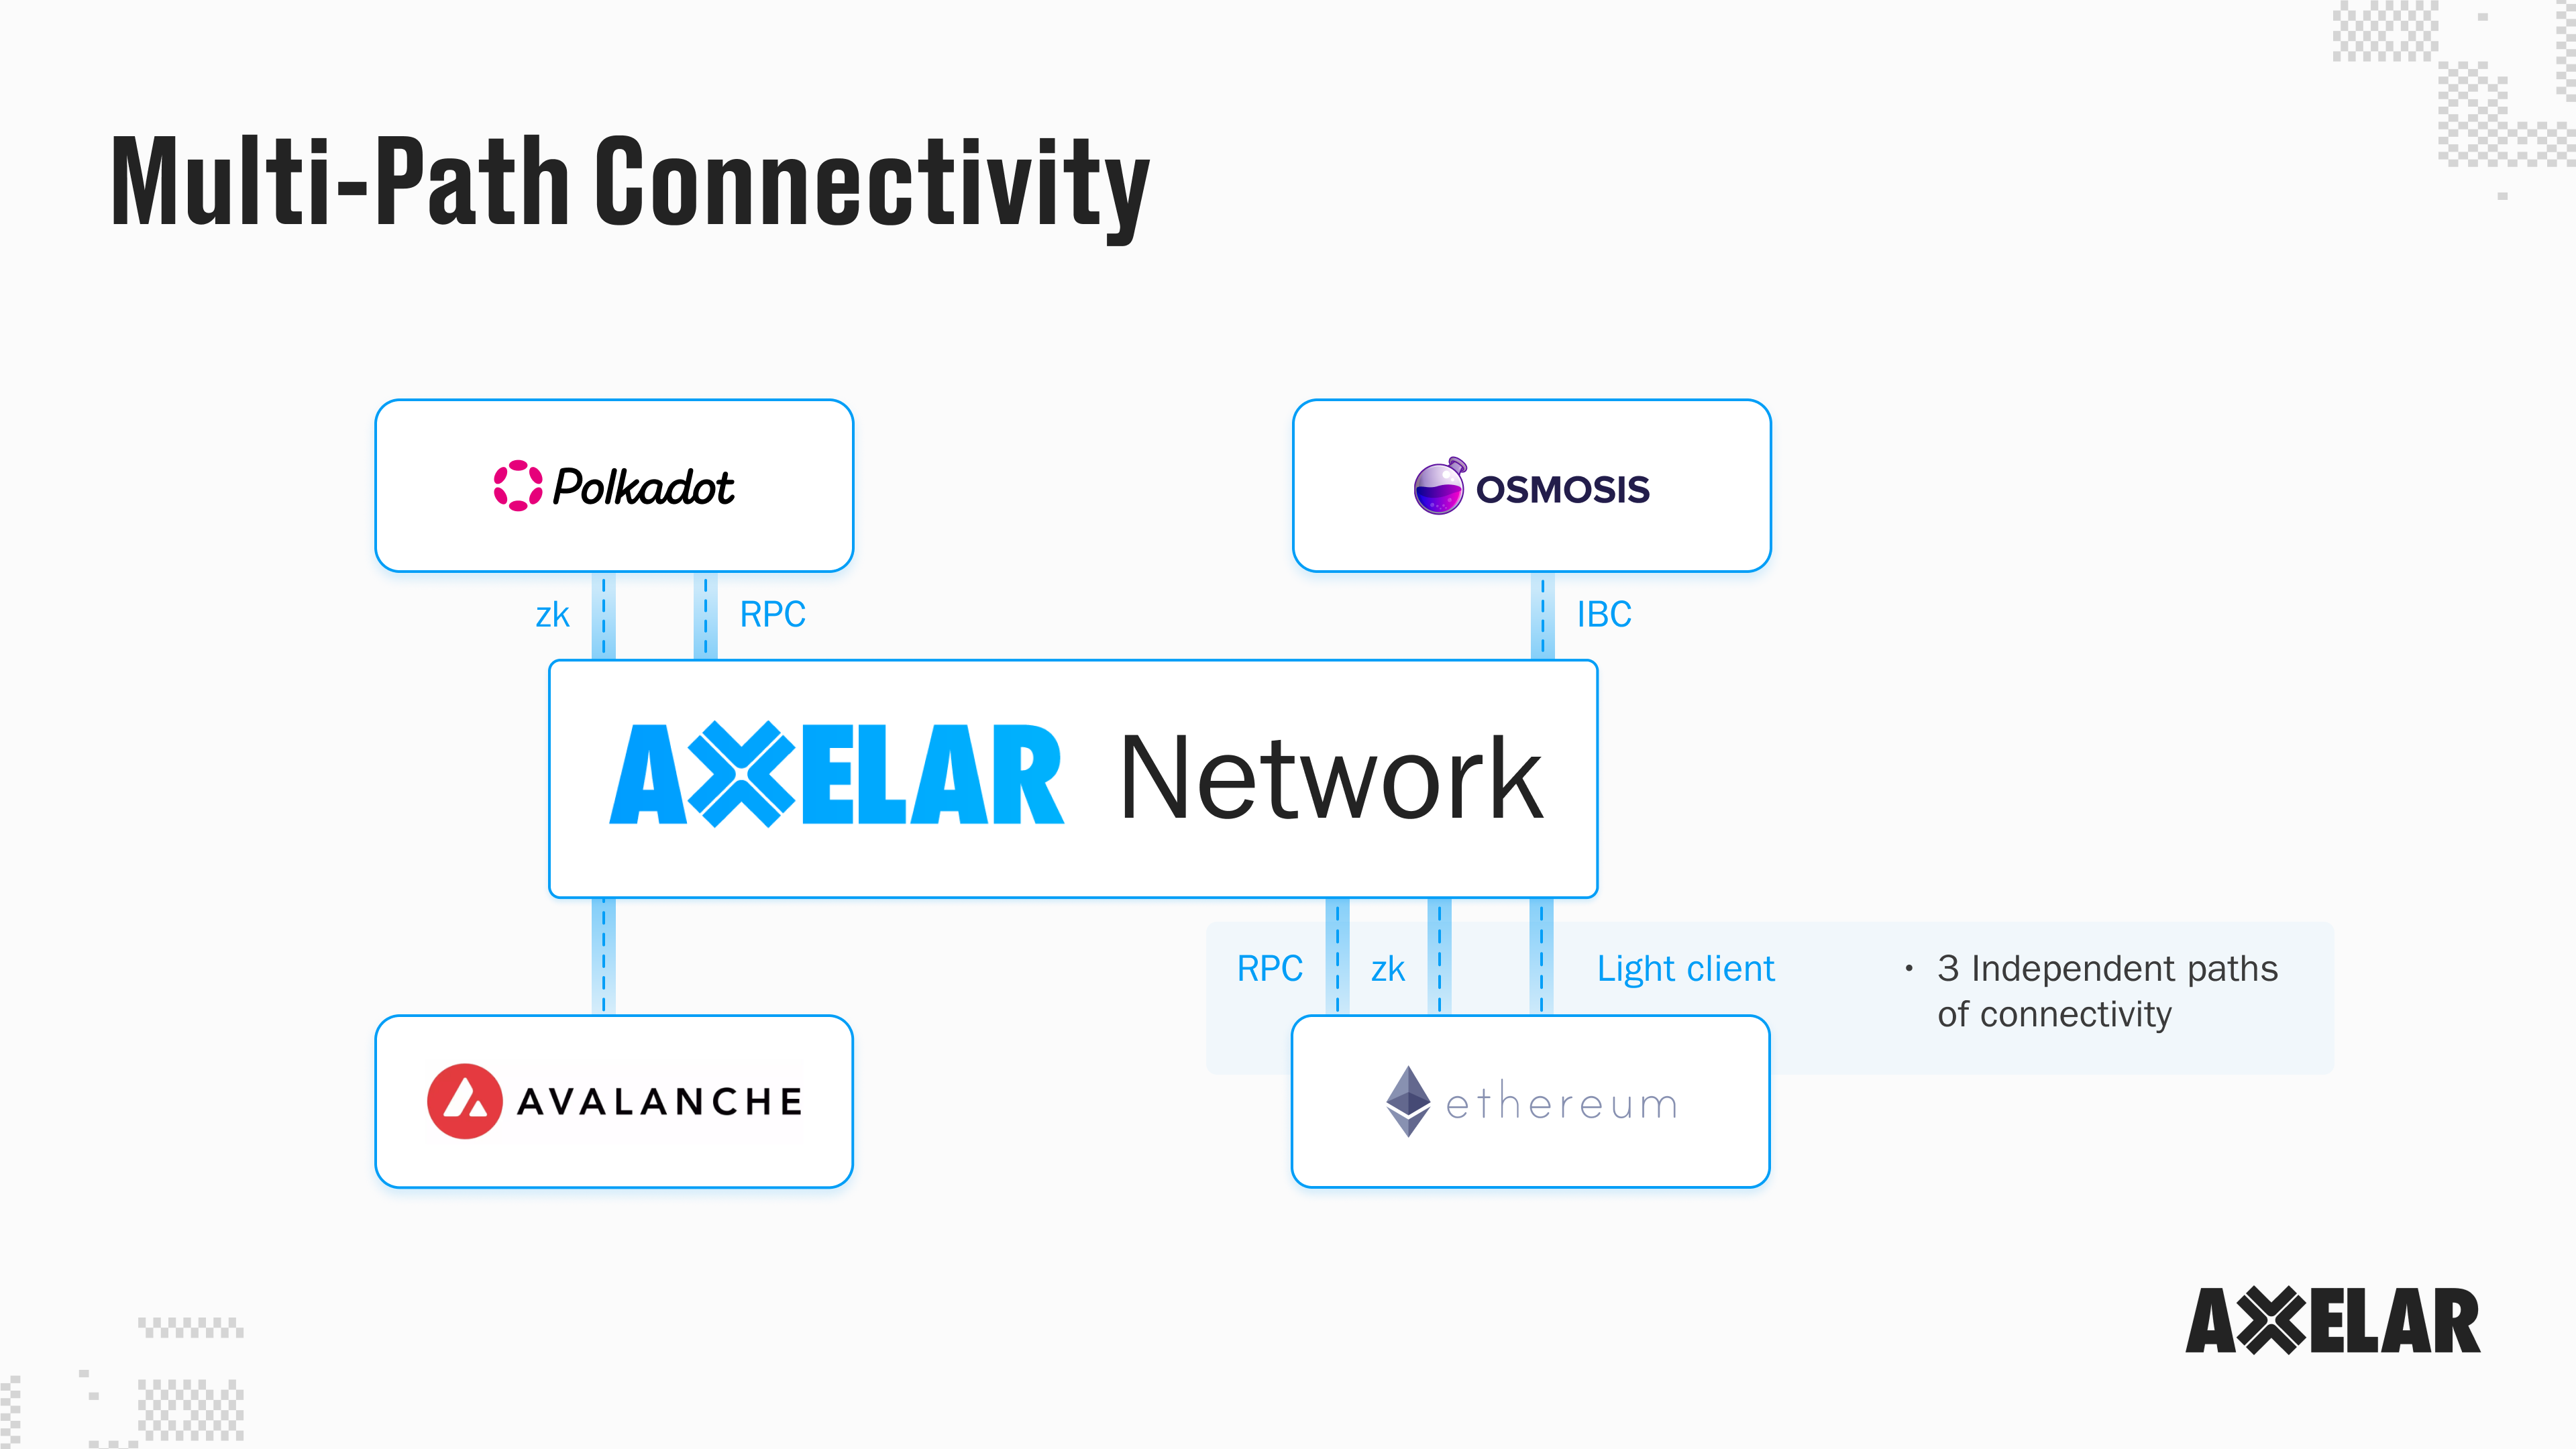 Diagram illustrating multi-path connectivity and future-proof interoperability on the Axelar network.